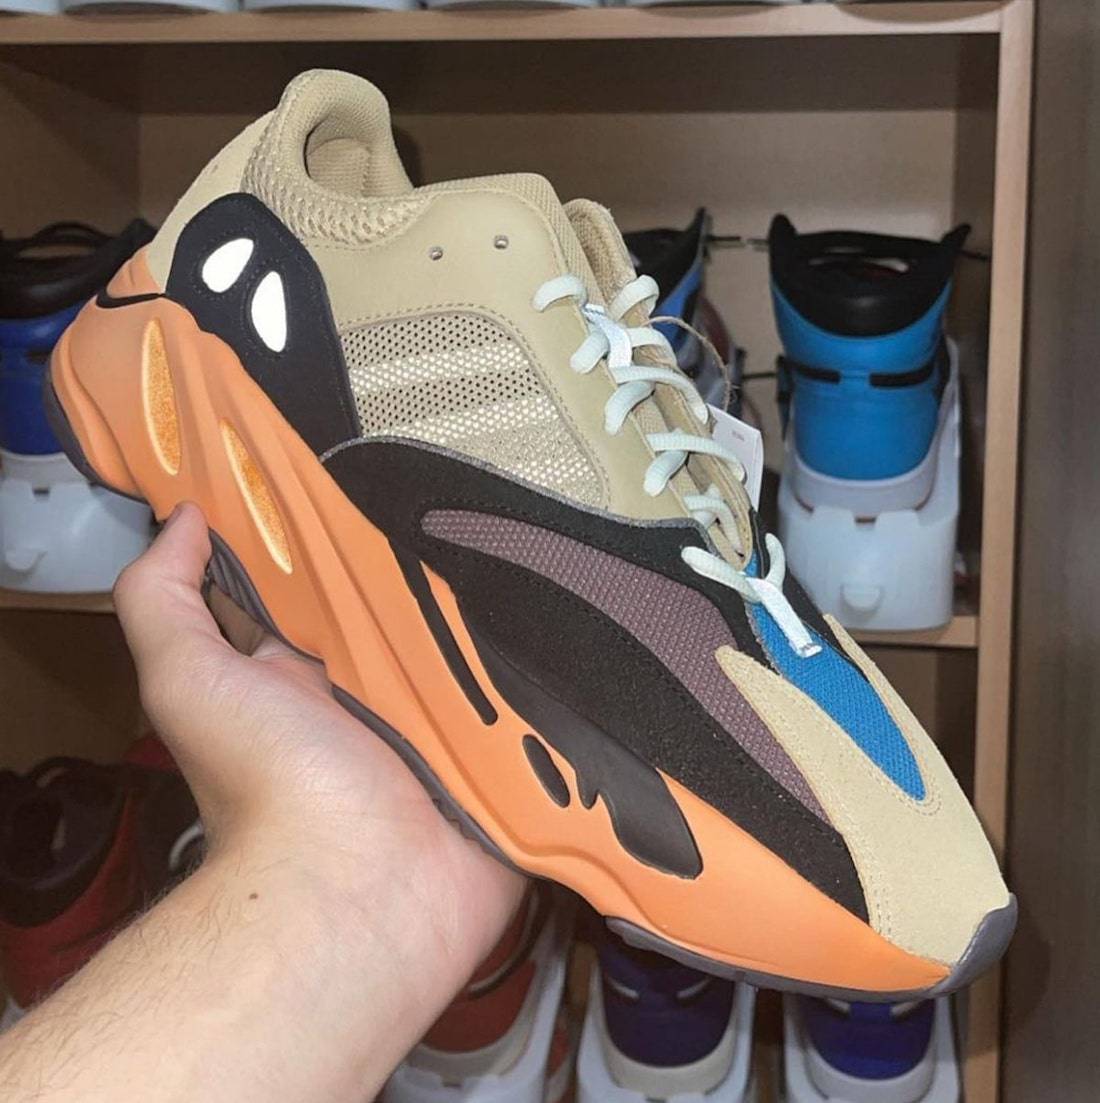 adidas-Yeezy-Boost-700-Enflame-Amber-Release-Date-Price-3